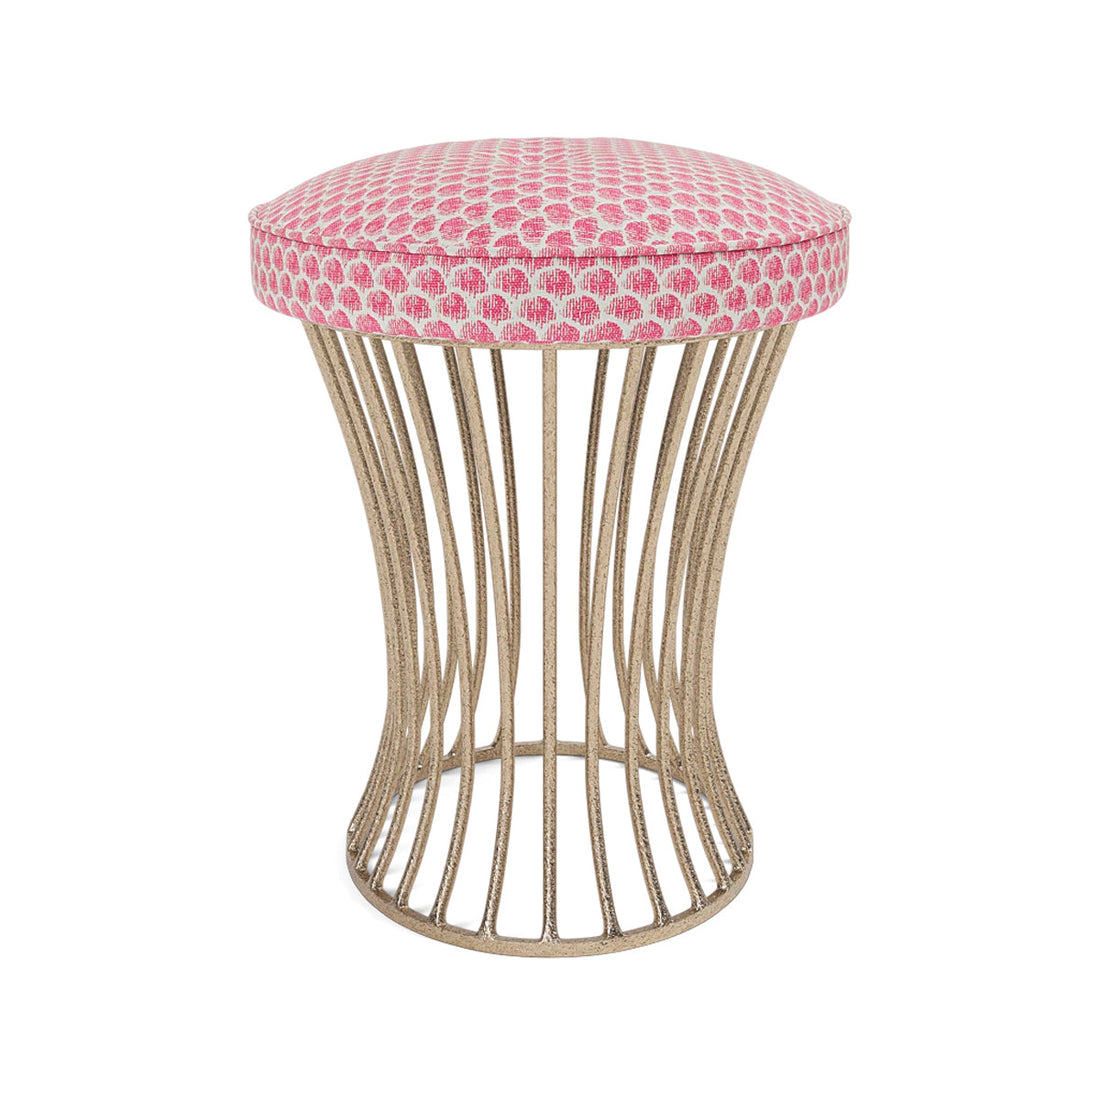 Made Goods Roderic Oval Stool in Humboldt Cotton Jute